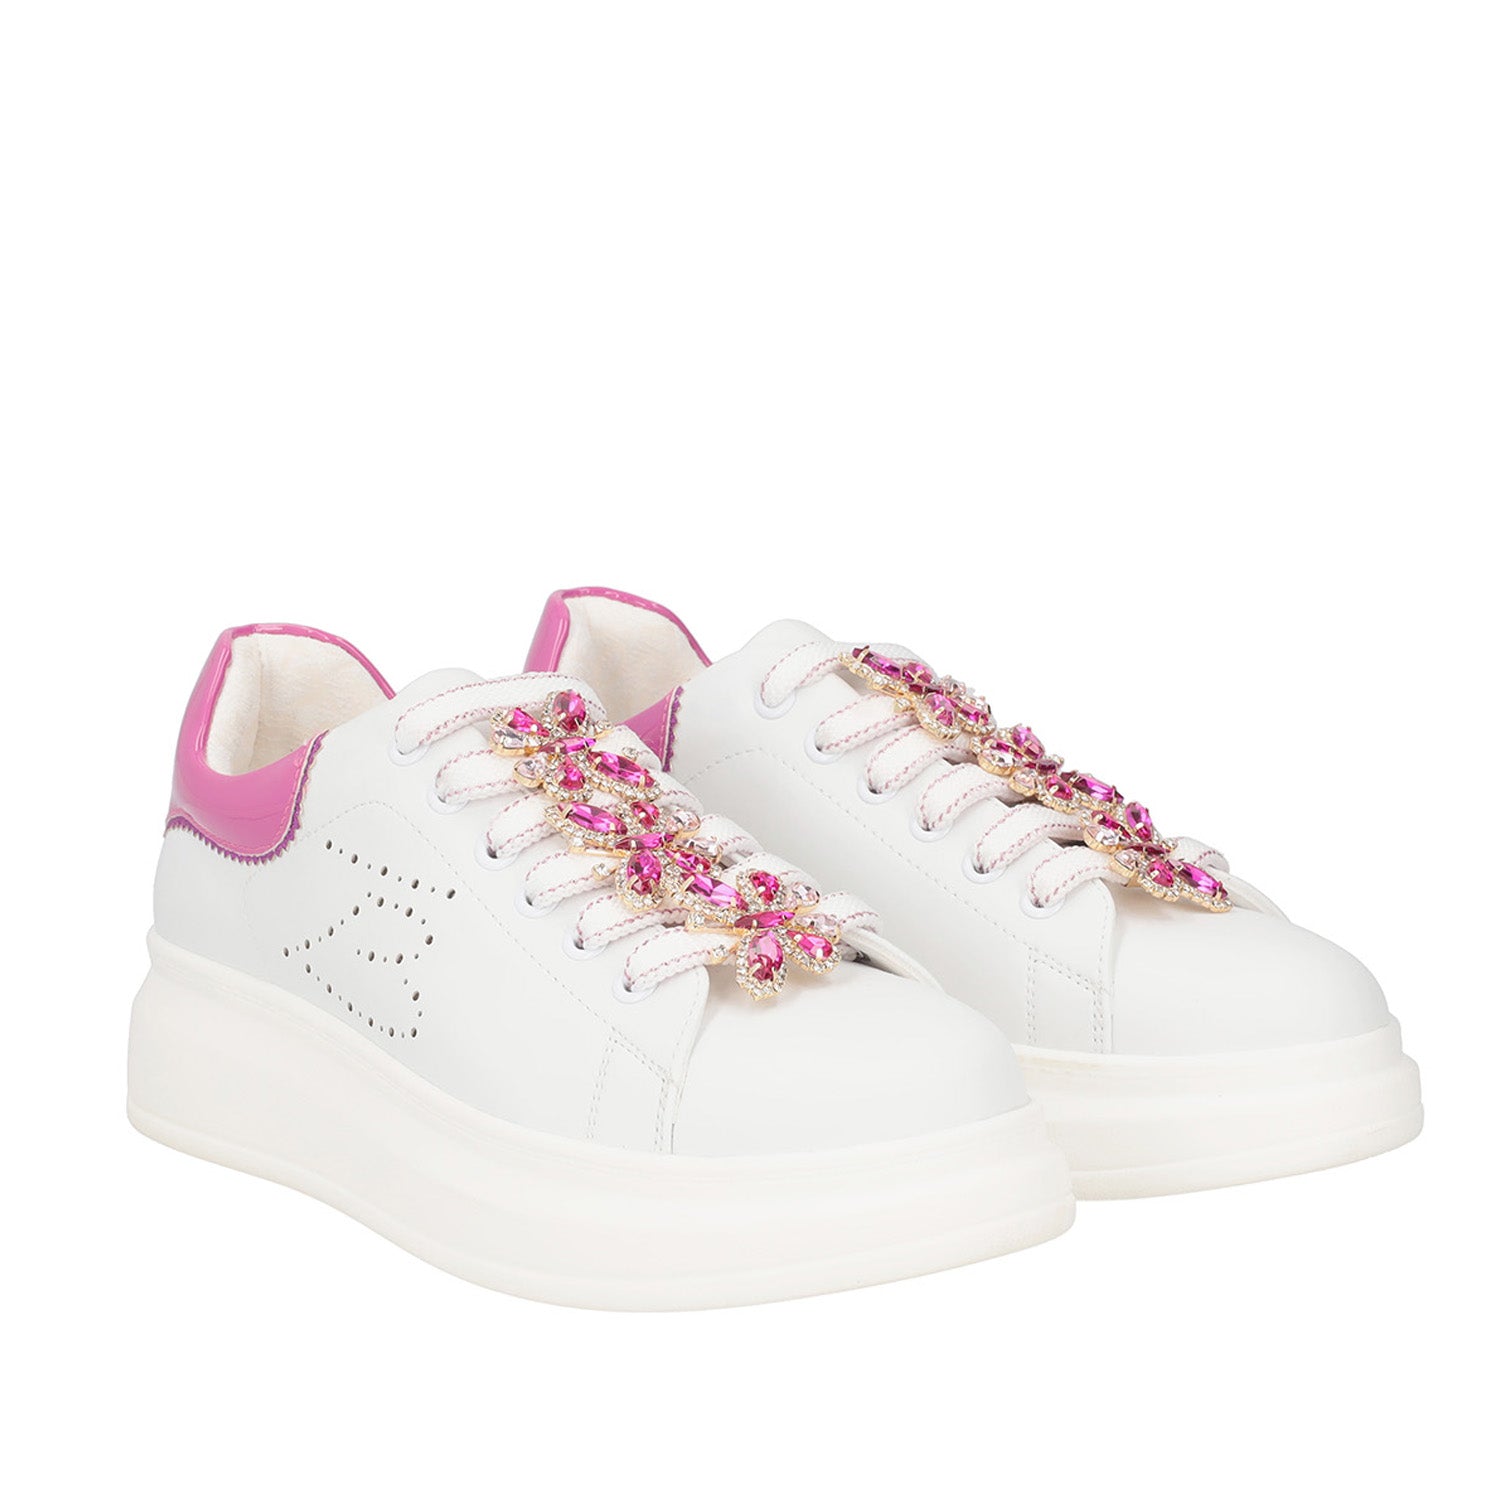 WHITE/FUXIA GLAMOUR SNEAKER WITH BUTTERFLY ACCESSORY